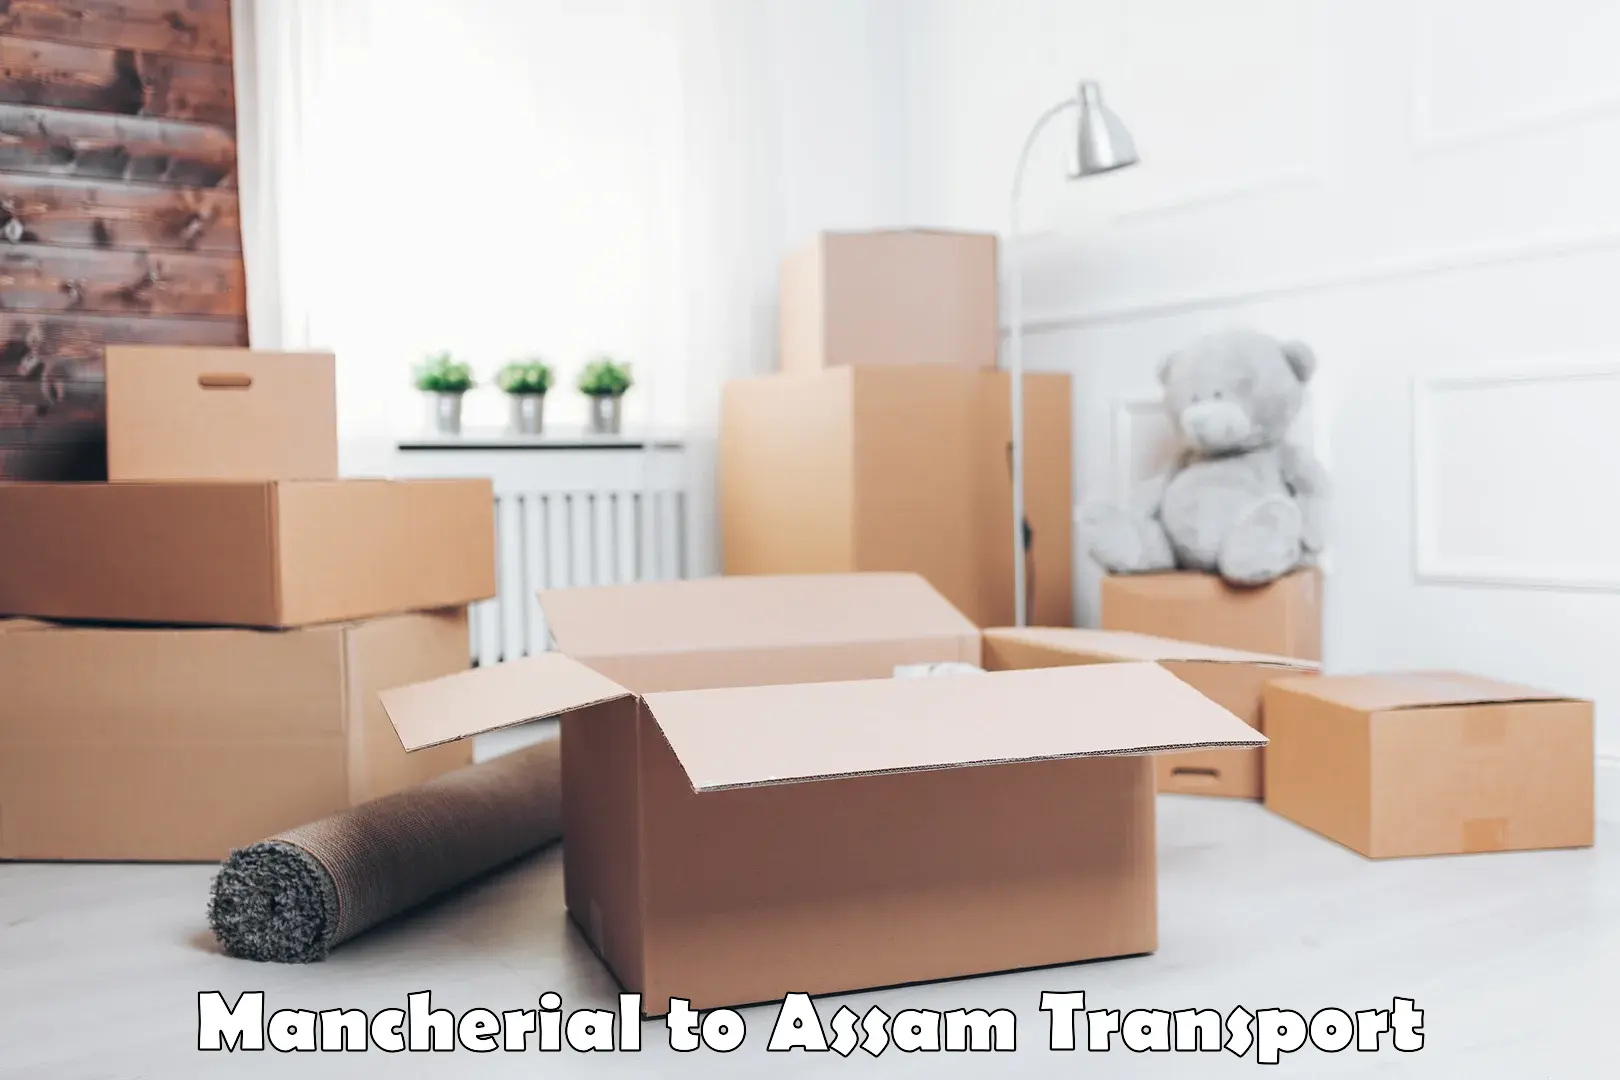 Container transport service Mancherial to Assam